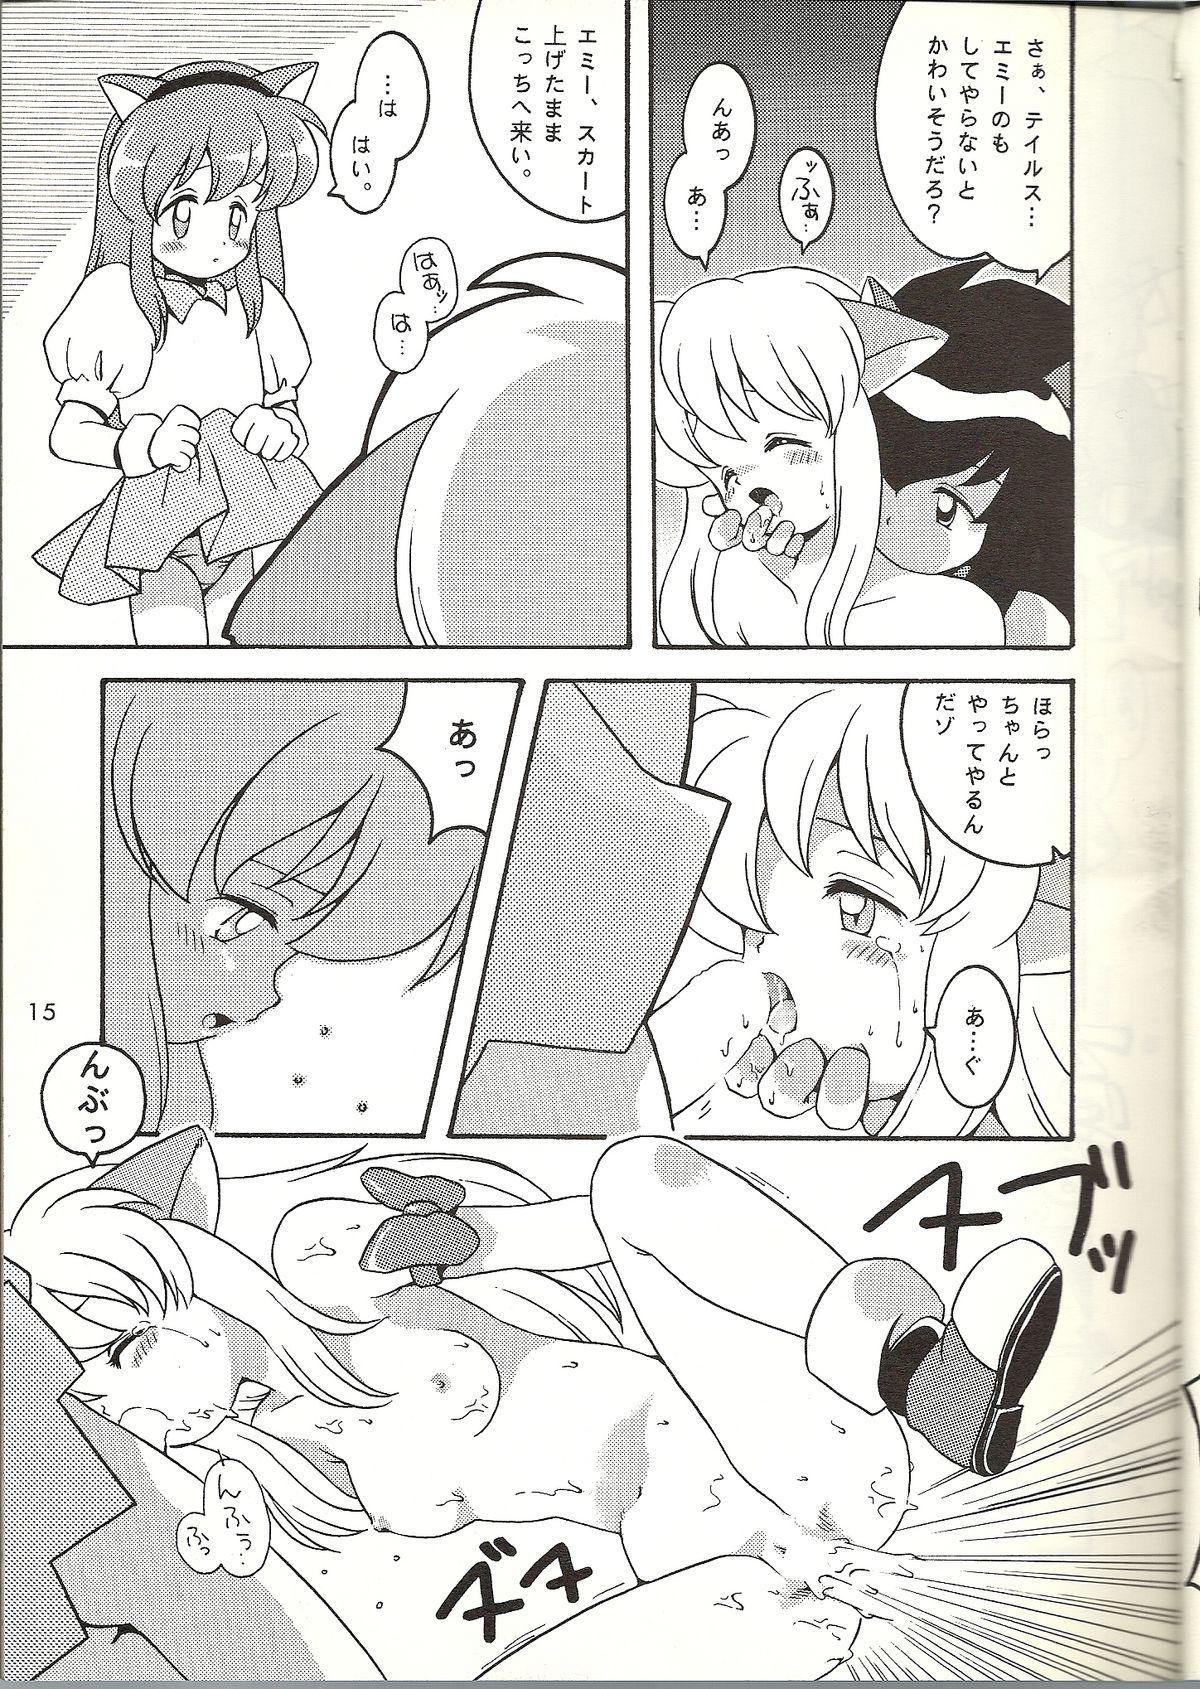 Bedroom O - Guardian heroes Sonic the hedgehog Delicia - Page 13